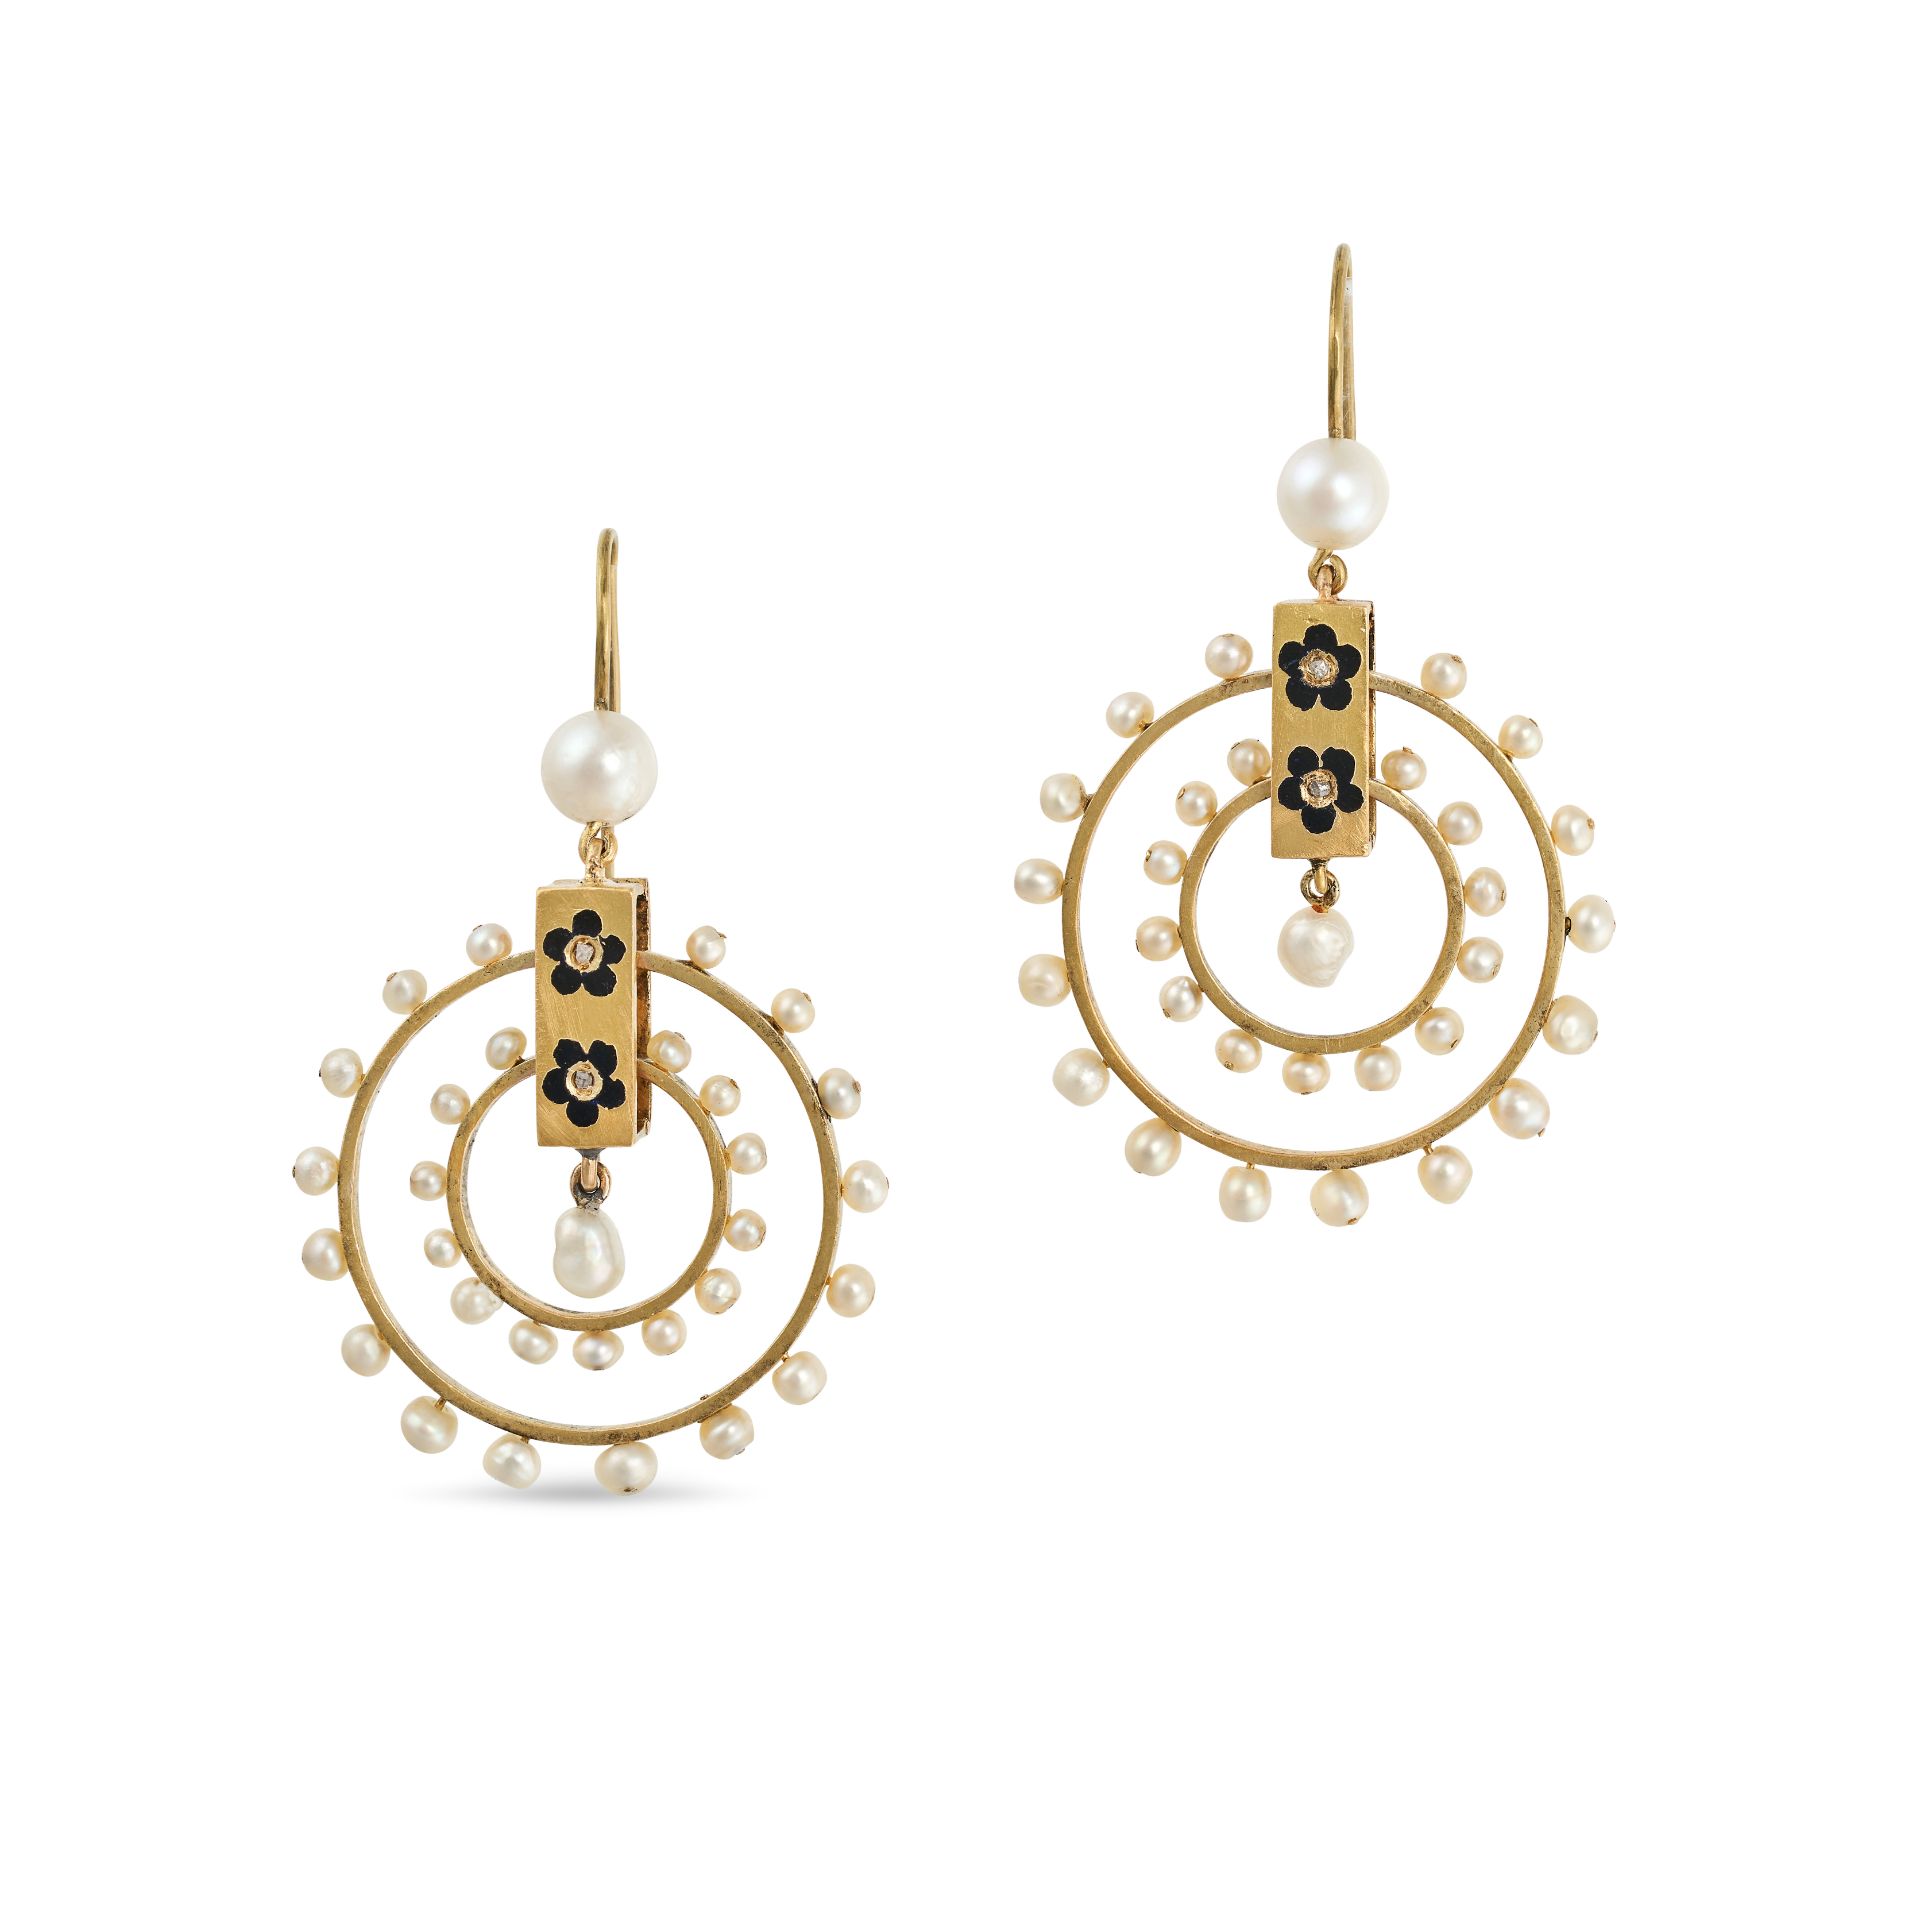 A PAIR OF ANTIQUE PEARL, DIAMOND, AND BLACK ENAMEL DROP EARRINGS in yellow gold, designed as two ...